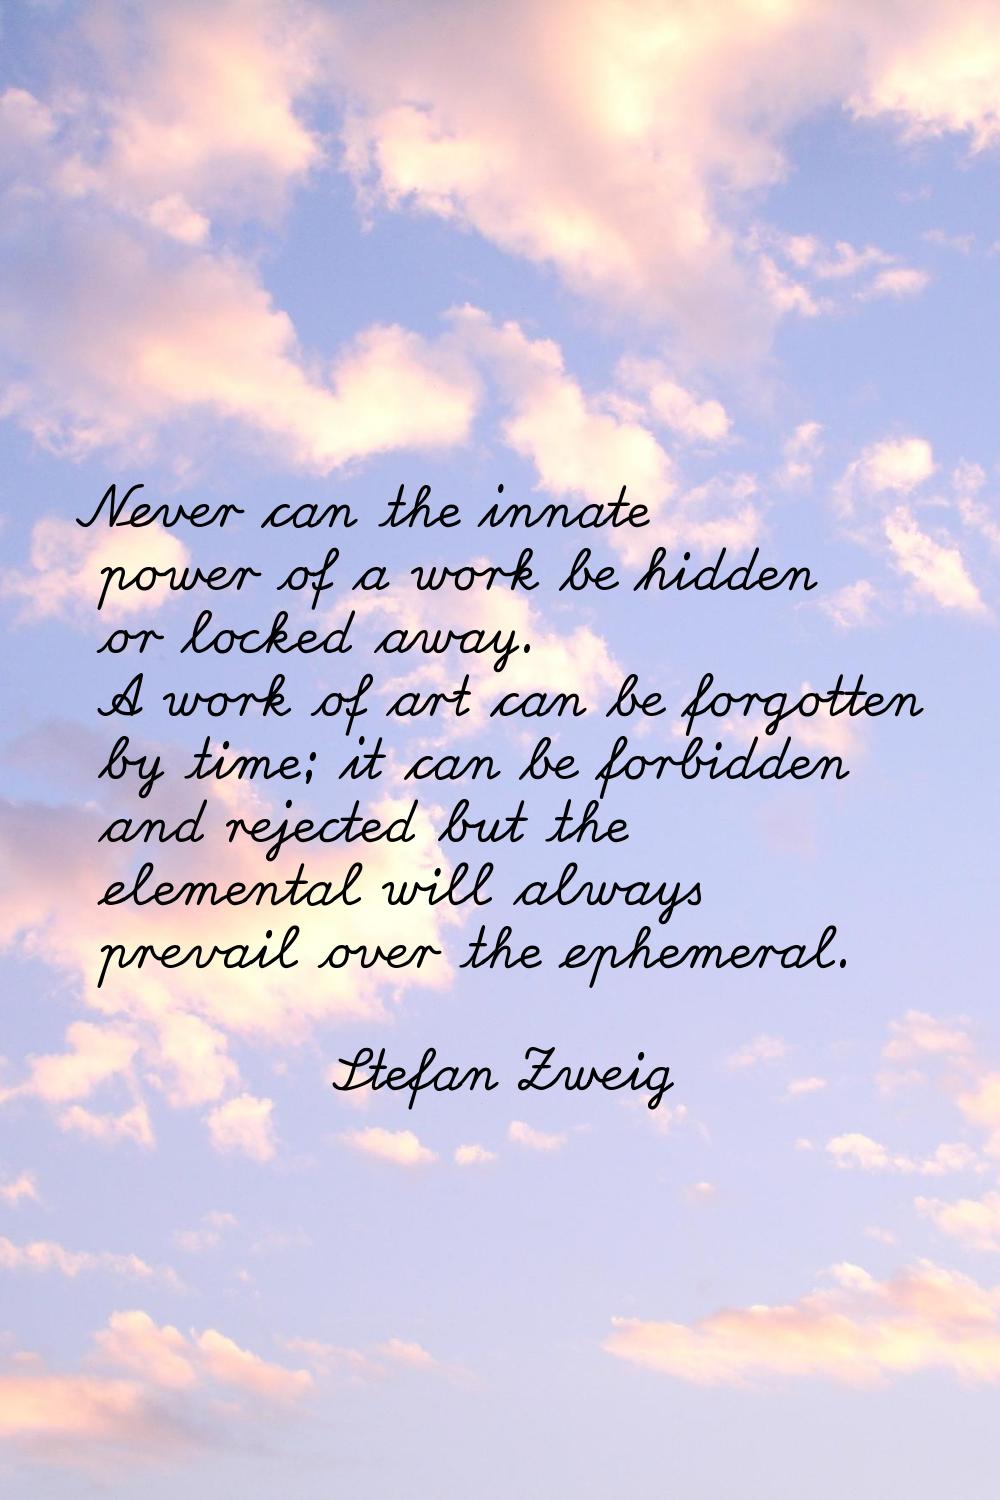 Never can the innate power of a work be hidden or locked away. A work of art can be forgotten by ti